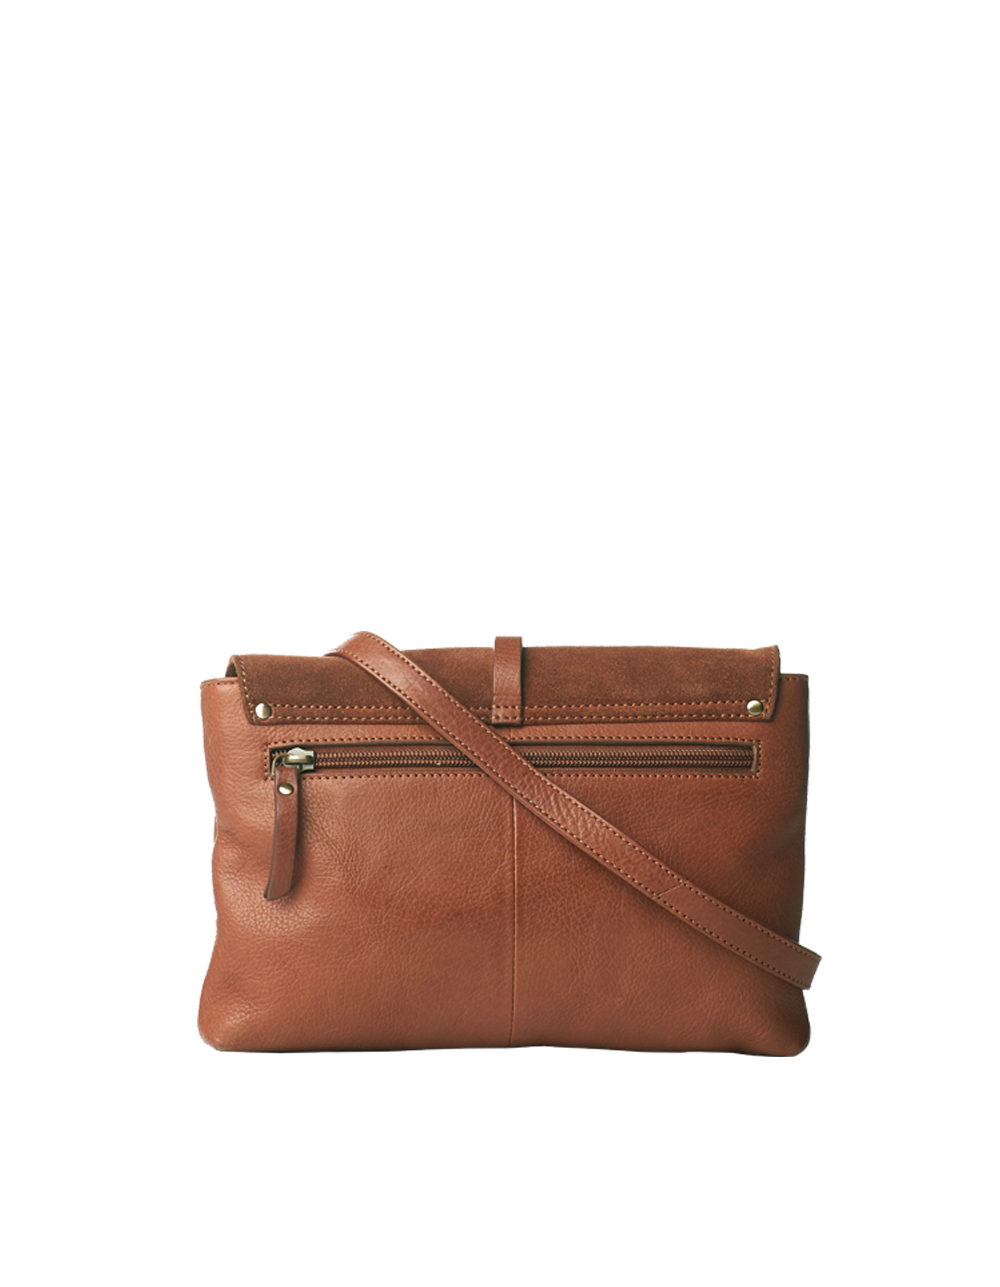 Whether you’re going dancing or just grabbing a drink with friends, Ella Midi offers enough space for your belongings. Includes a detachable and adjustable shoulder strap or remove the strap and use Ella Midi as a clutch. This item was handcrafted with vegetable tanned eco-leather. Made in India.